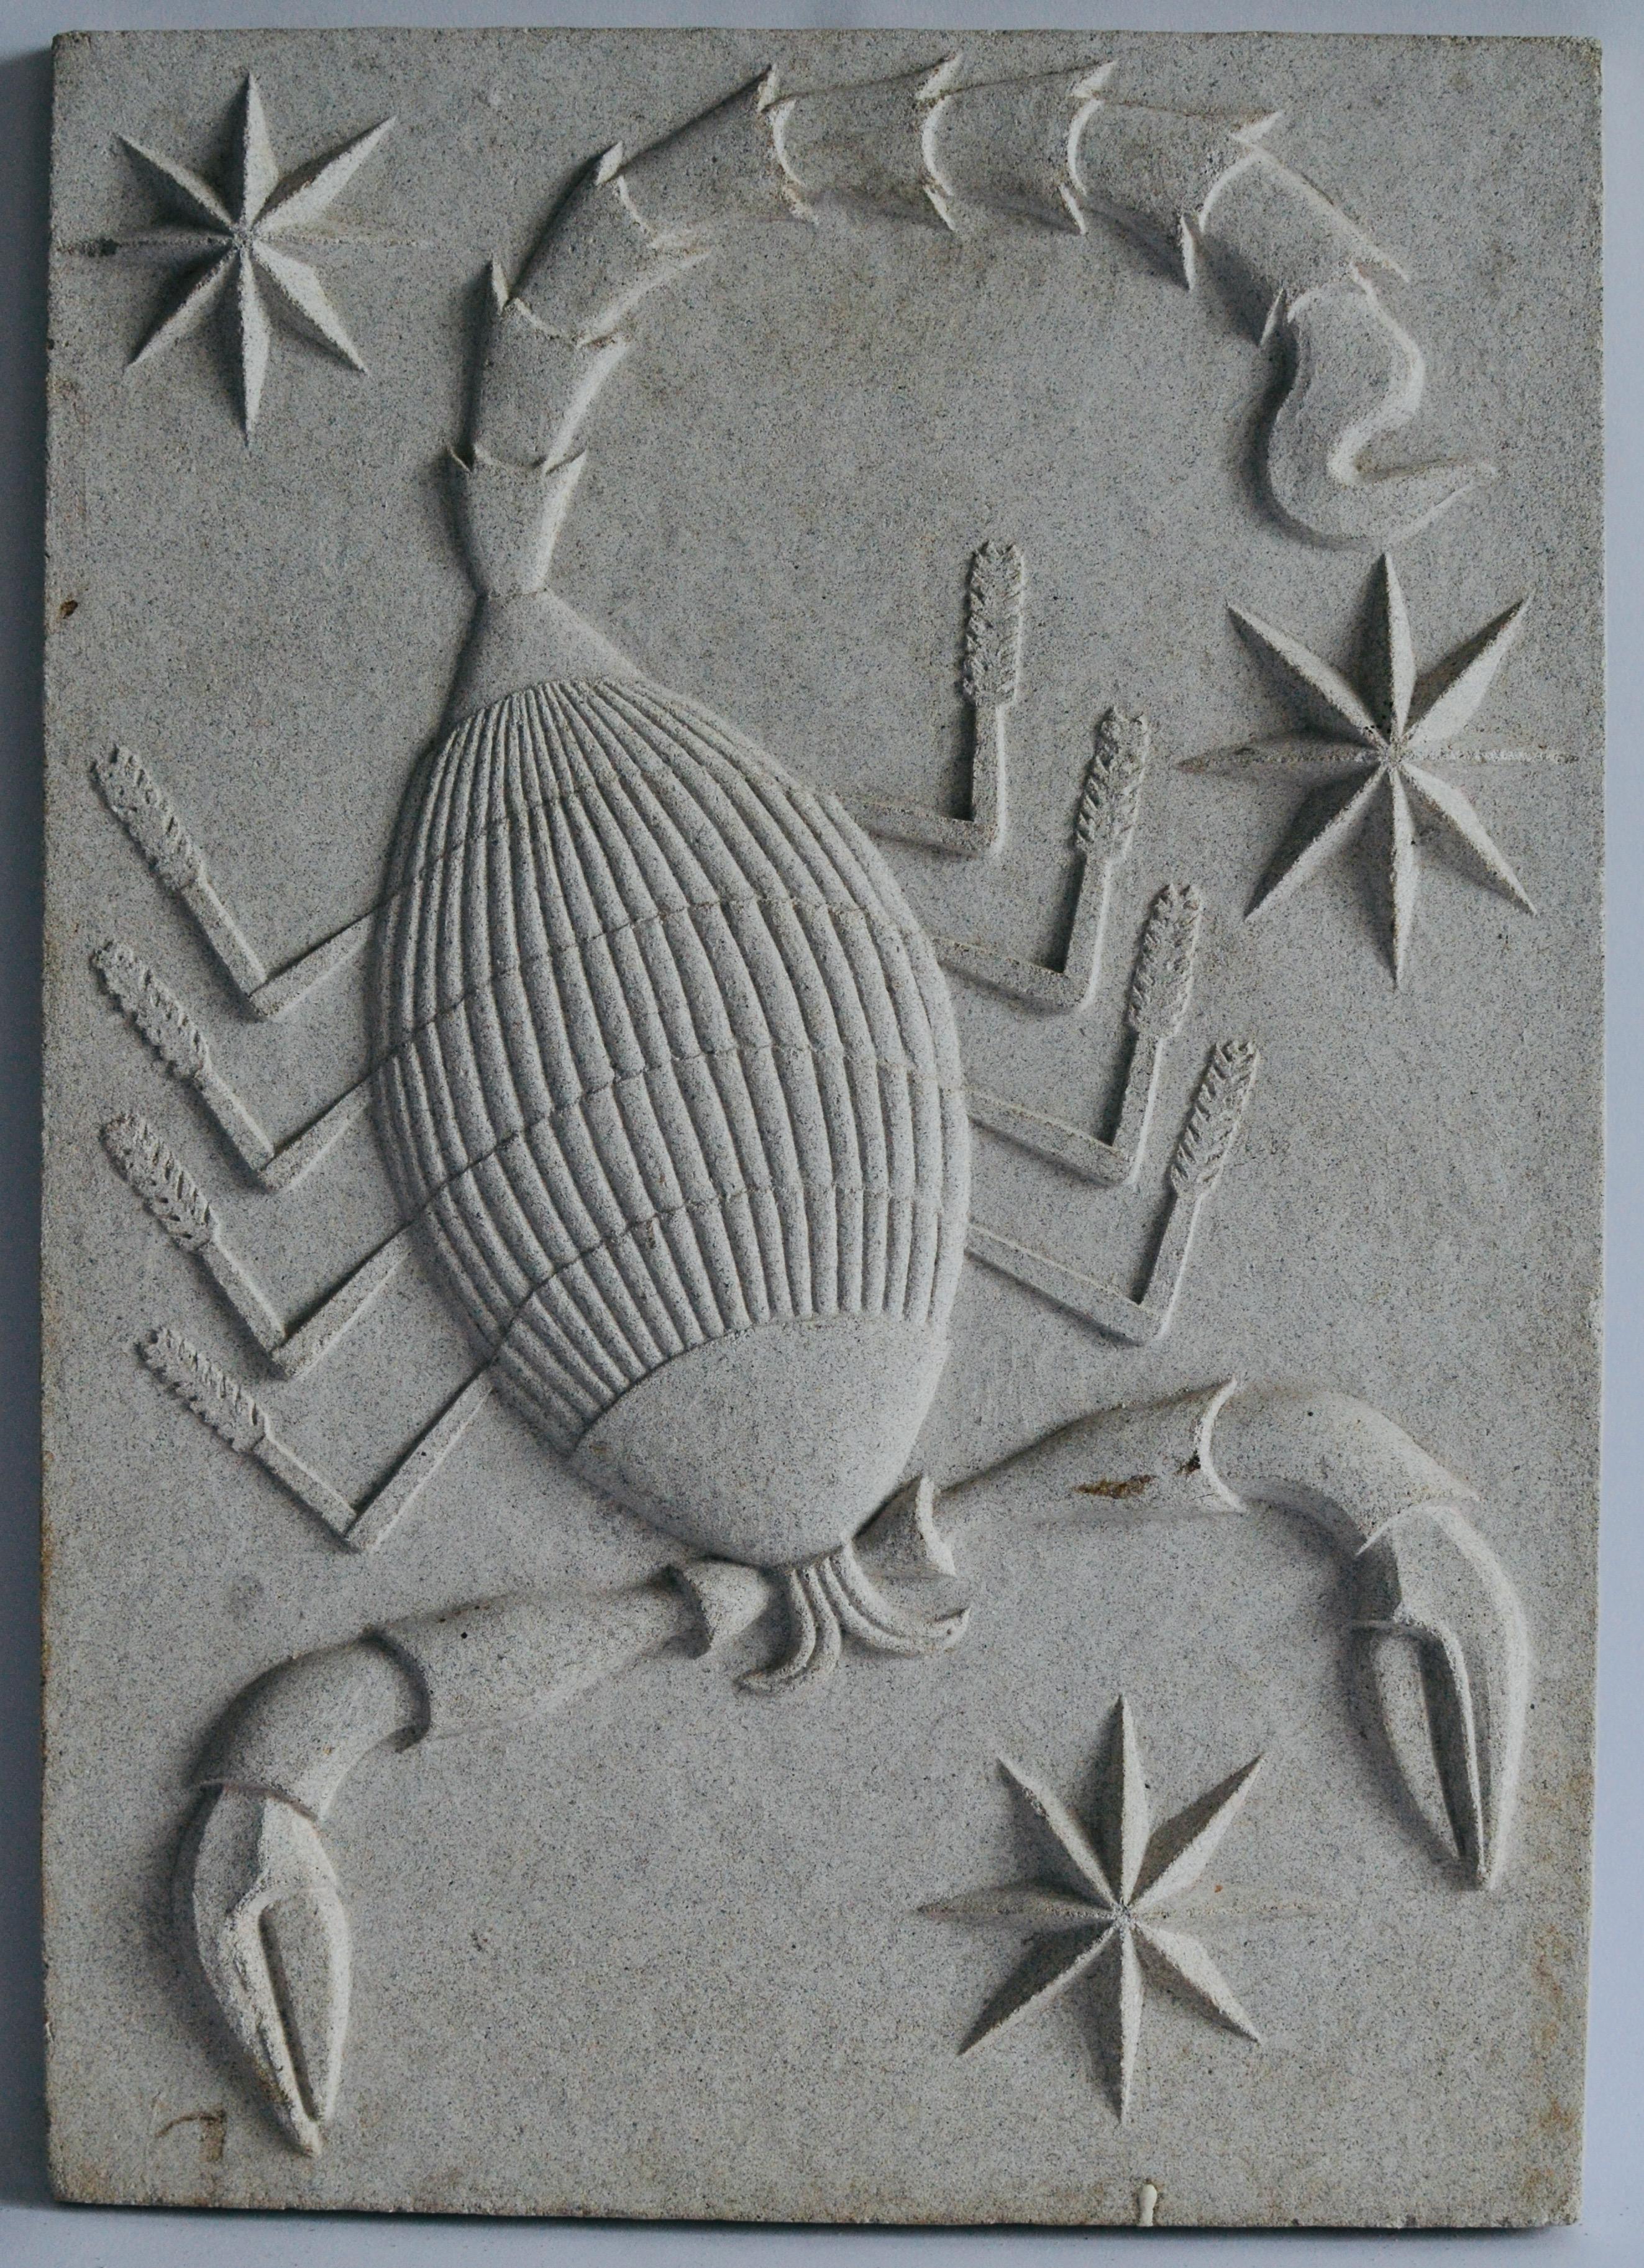 Zodiac Artificial Stone Relief Sign of Pisces, c. 1940 2